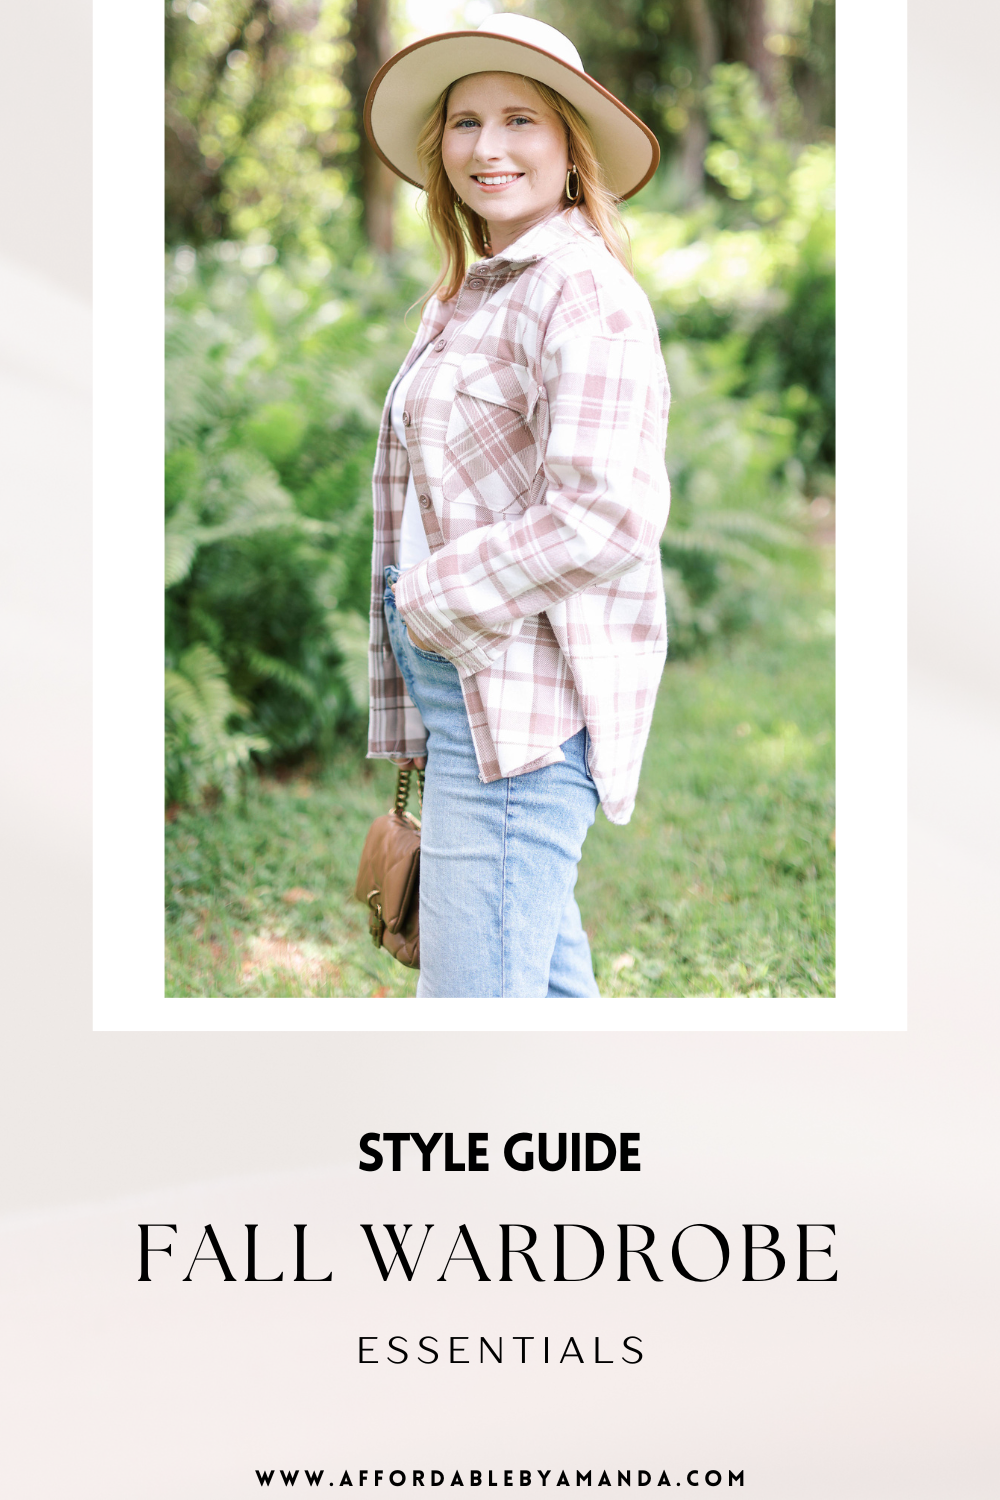 5 MUST-HAVES FOR YOUR FALL WARDROBE 2022